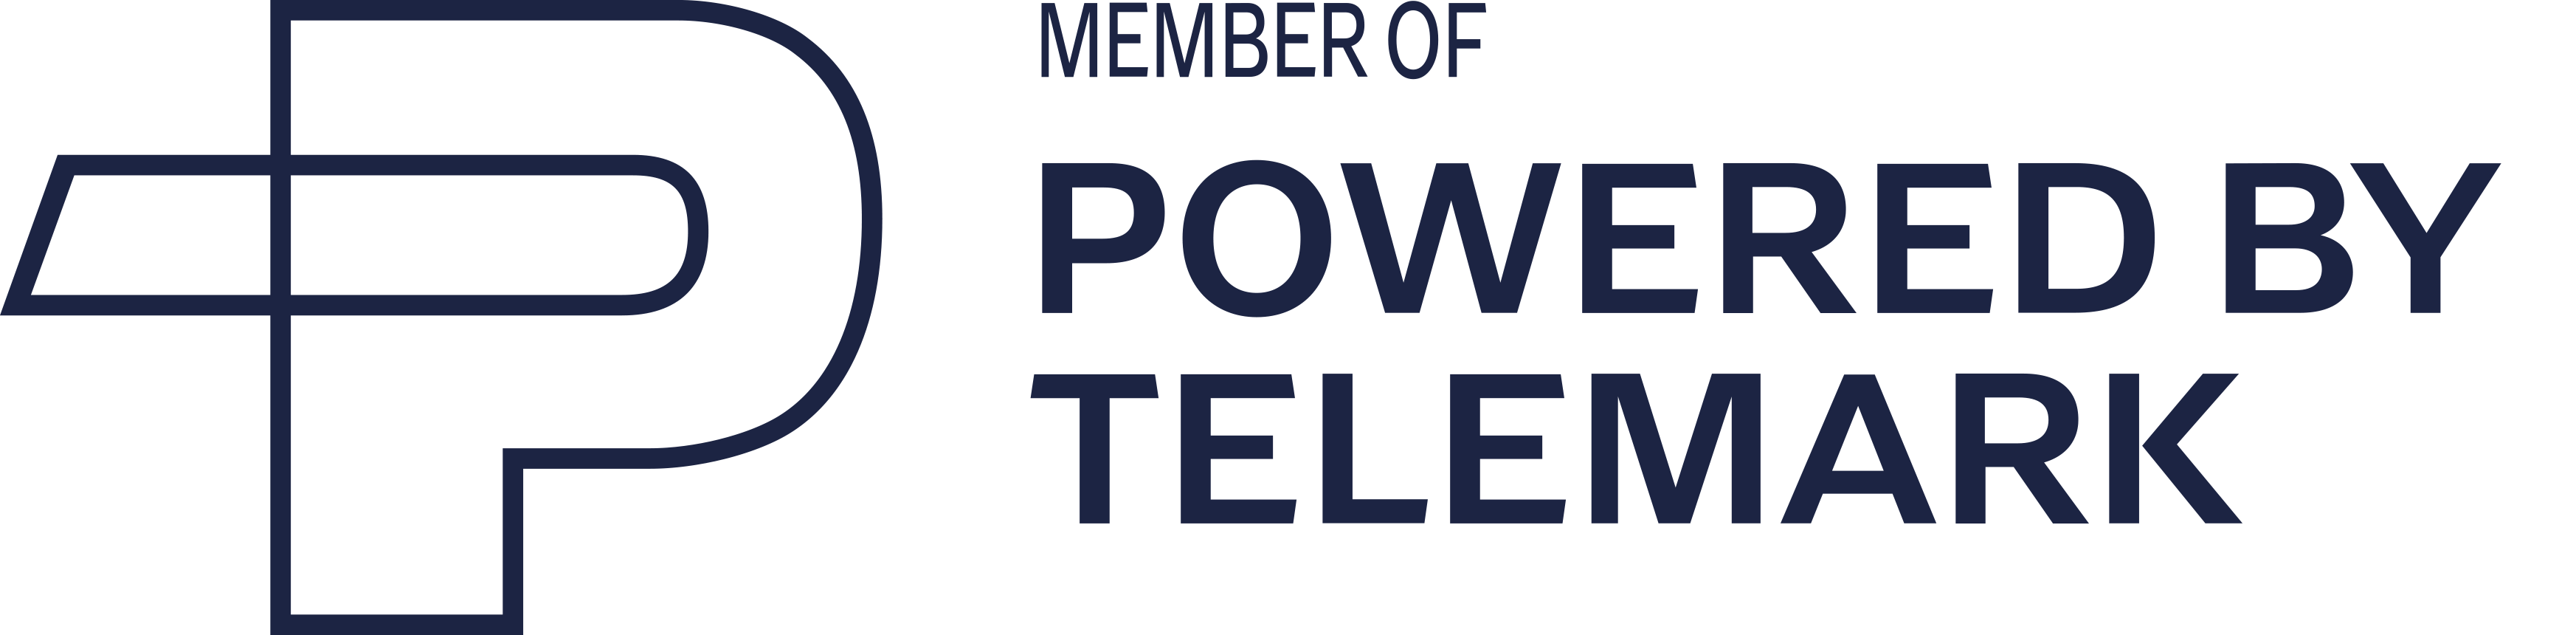 member of Powered by Telemark